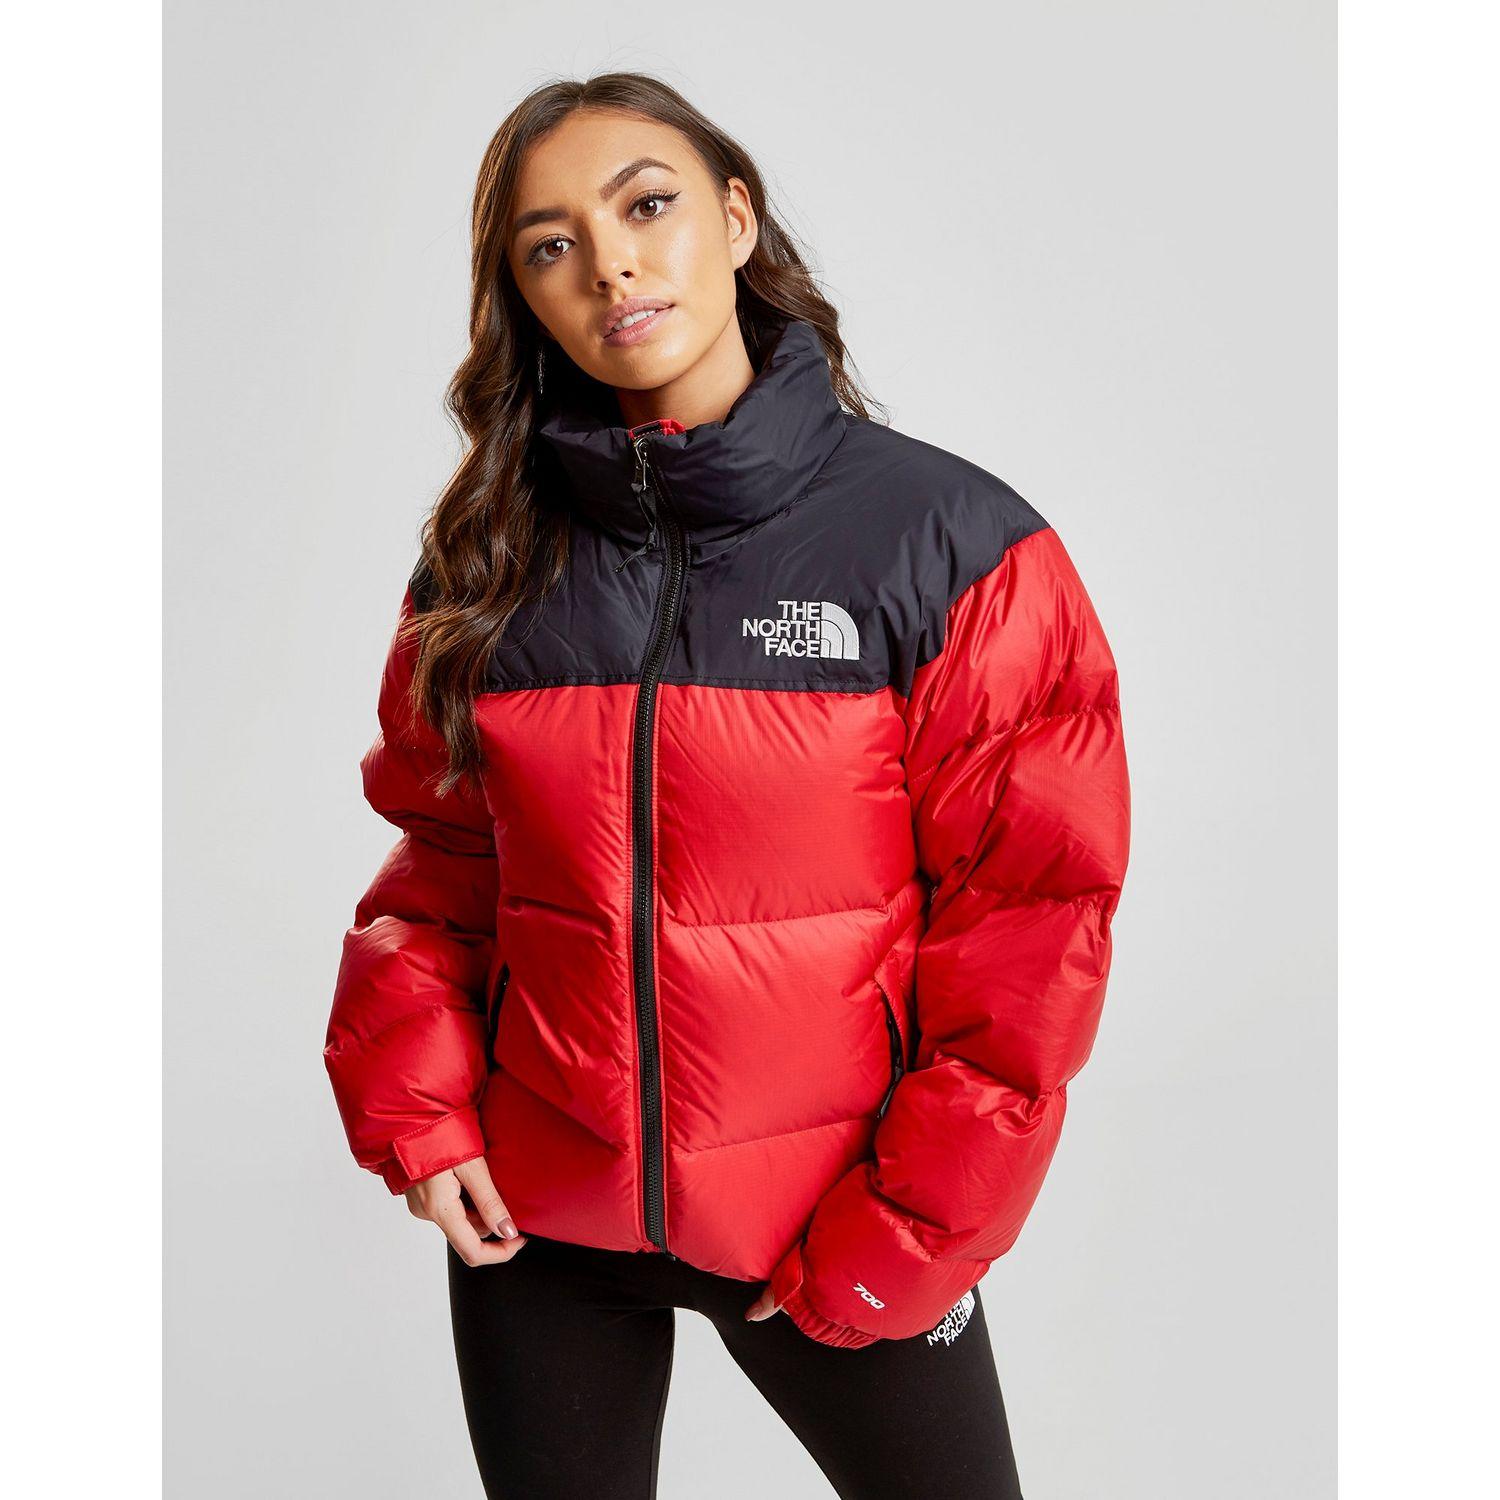 Lyst - The North Face Nuptse 1996 Jacket in Red